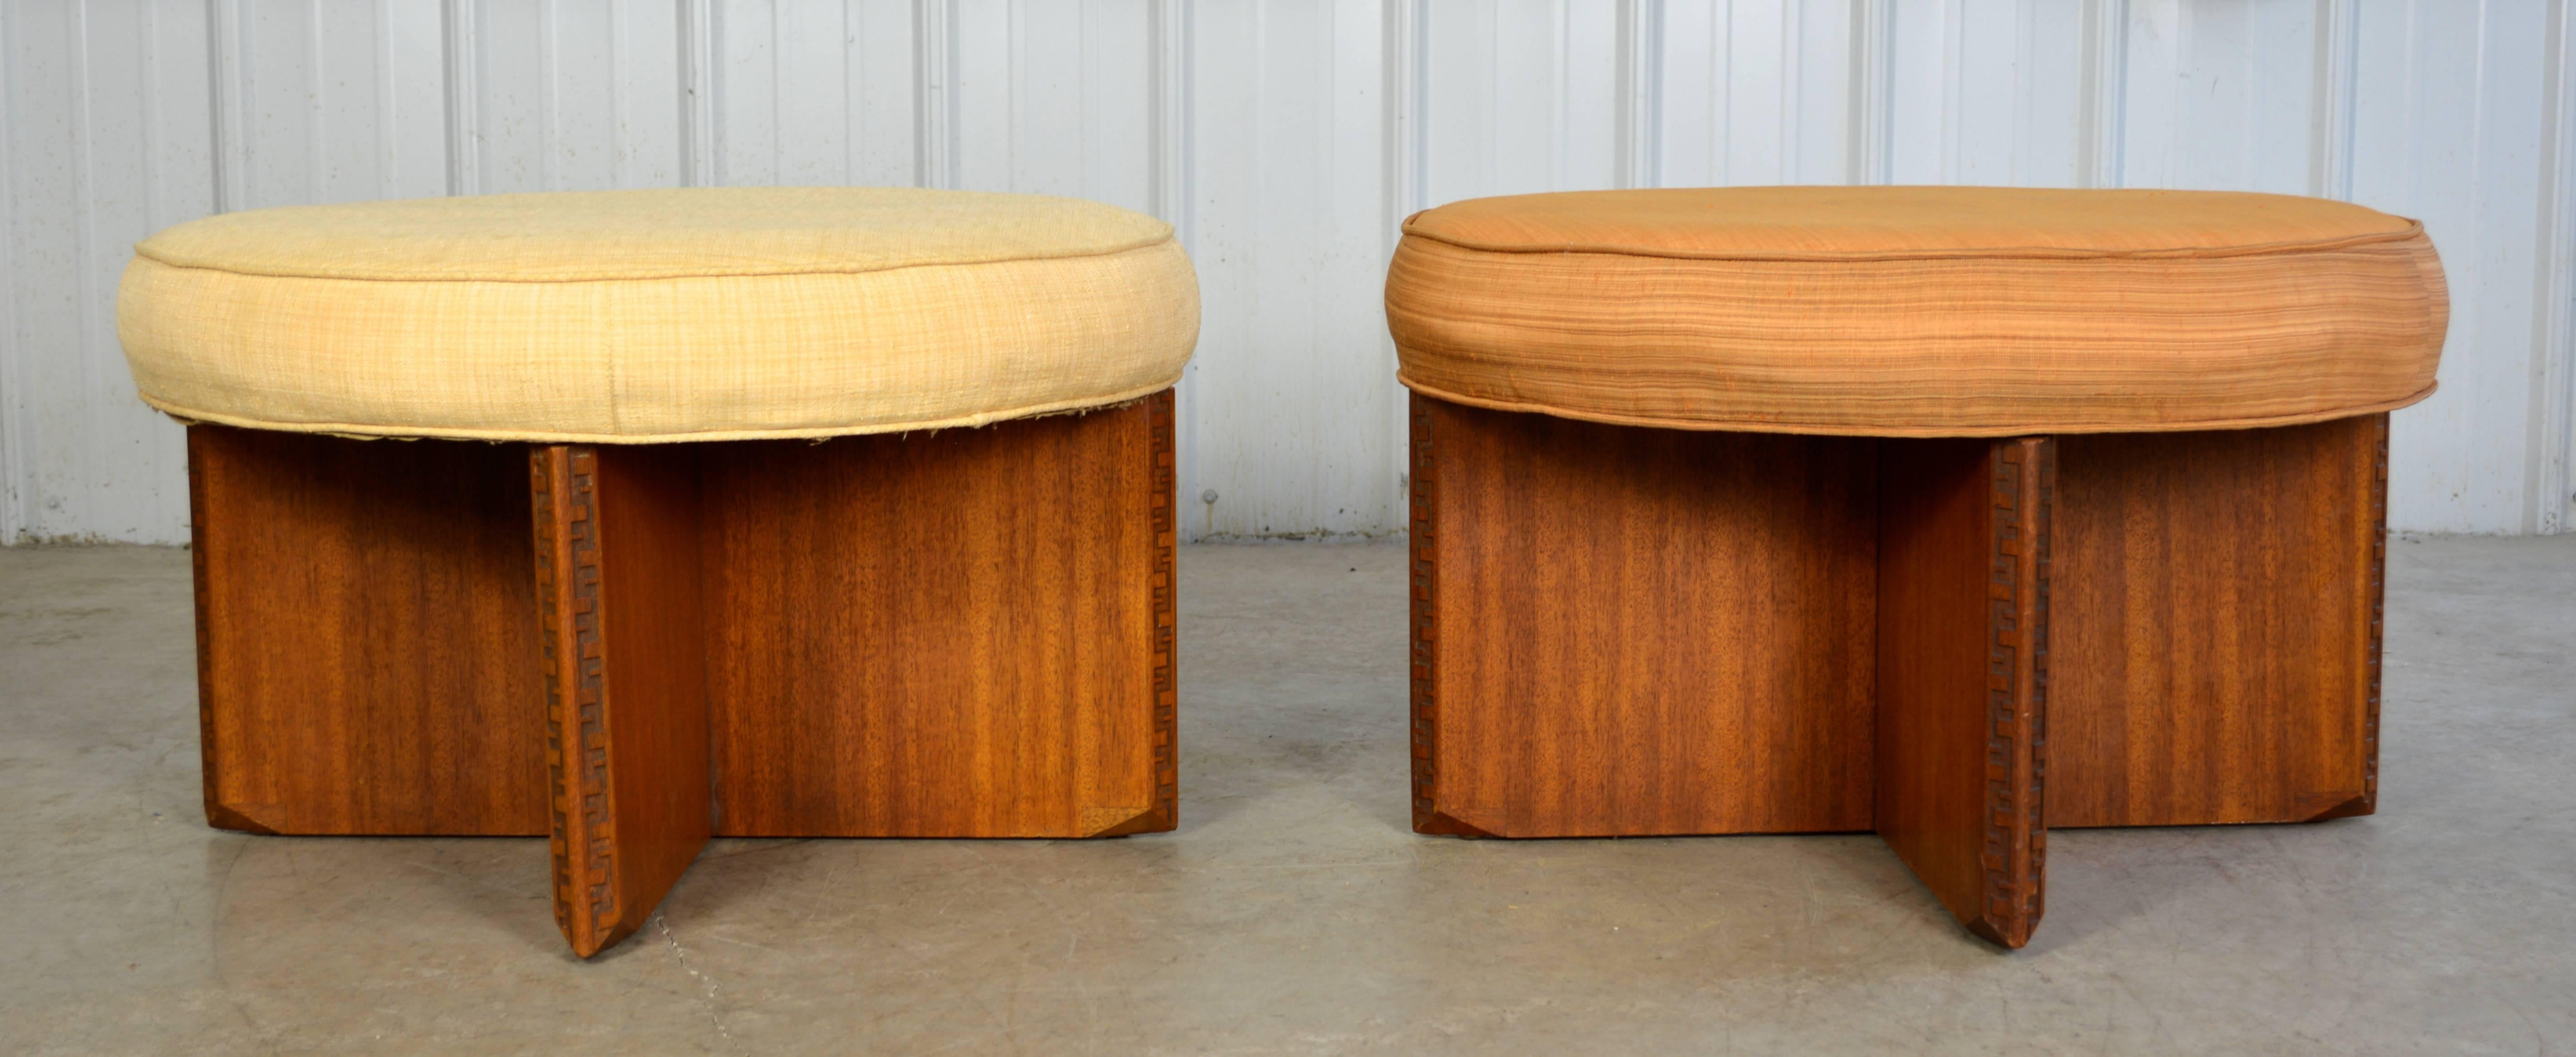 A beautiful pair of large round swiveling ottomans designed by Frank Lloyd Wright for his 